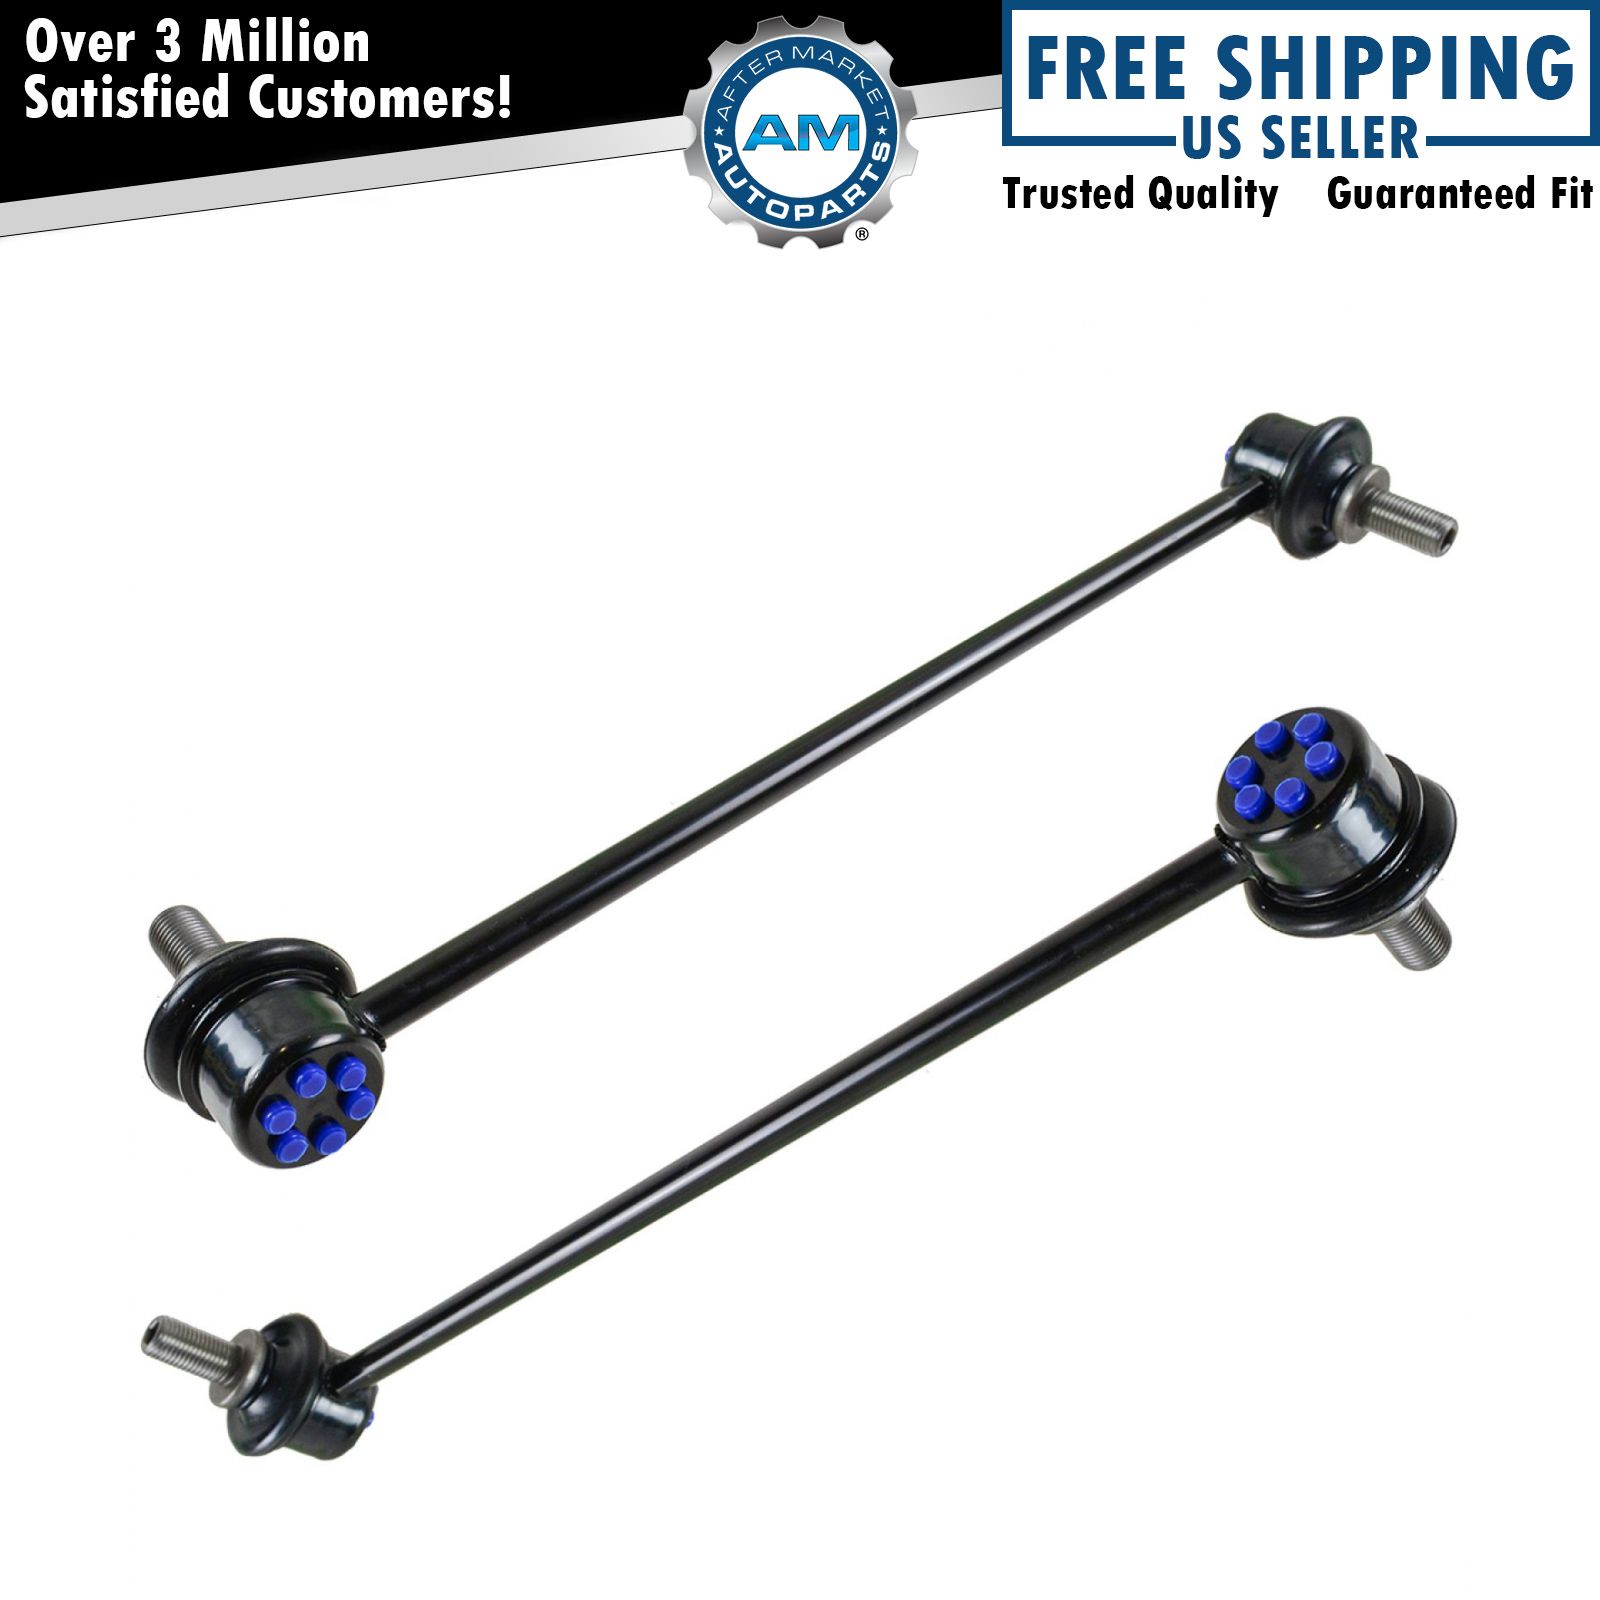 OEM Front Sway Bar End Link Pair LH & RH Sides for Honda Pilot Acura MDX ZDX New | eBay Acura Mdx Sway Bar Link Replacement Cost